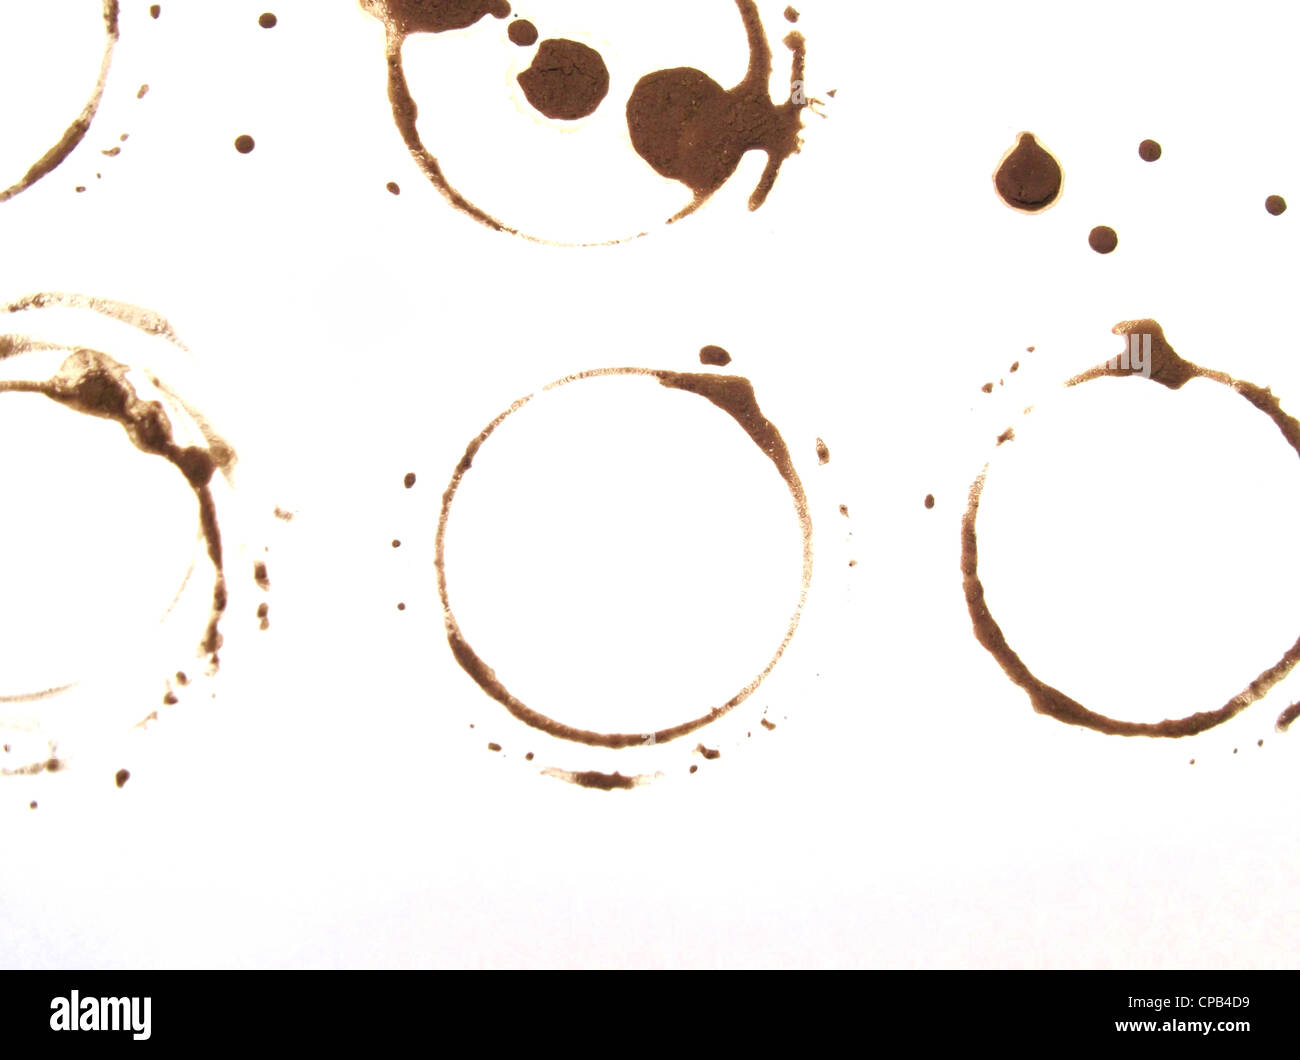 Coffee stains and splatters design for grunge design. Stock Photo